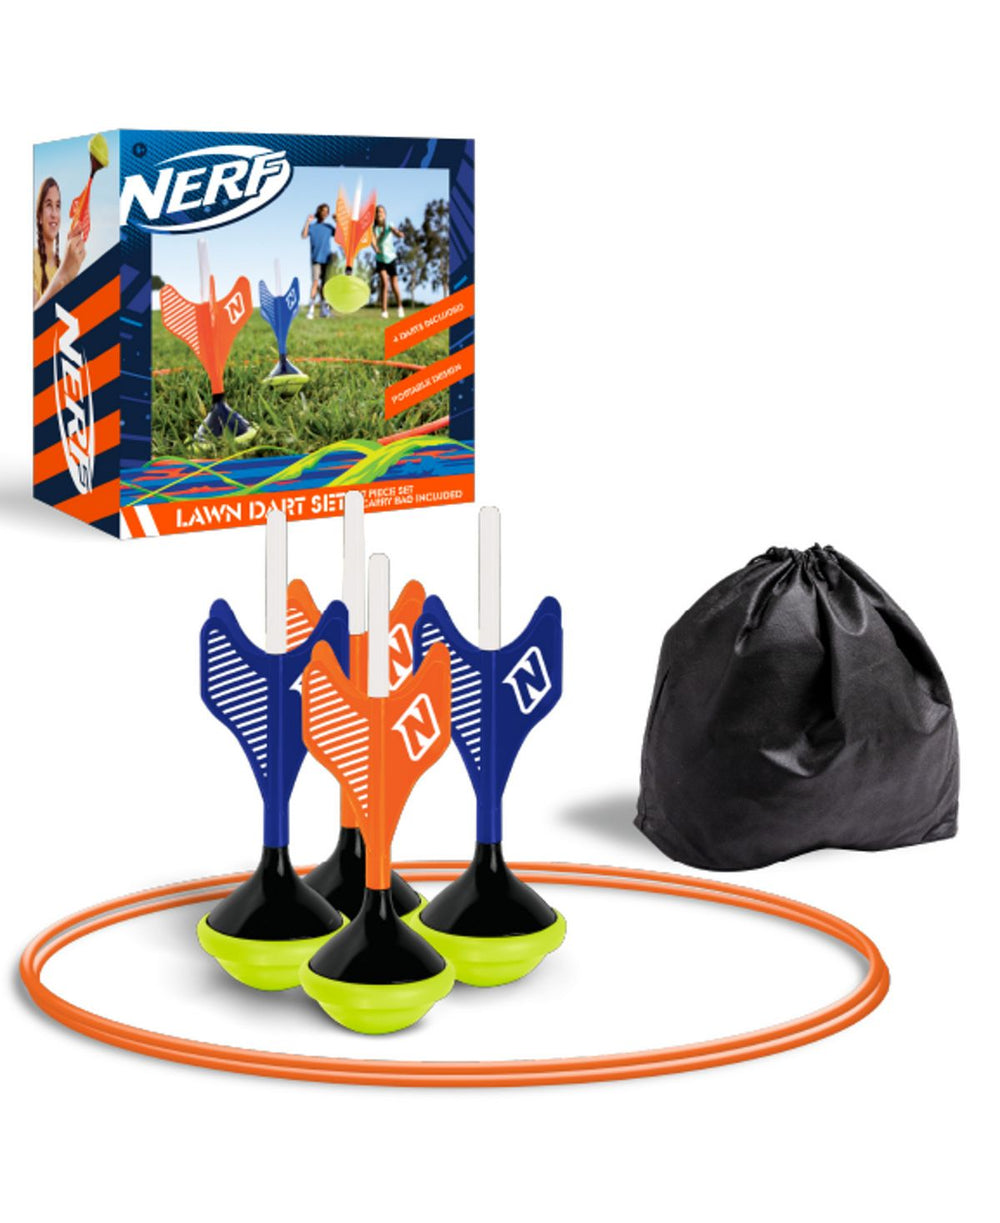 Nerf Outdoor Soft Tip Lawn Dart Game Set with Color-Coded Darts and Storage Bag